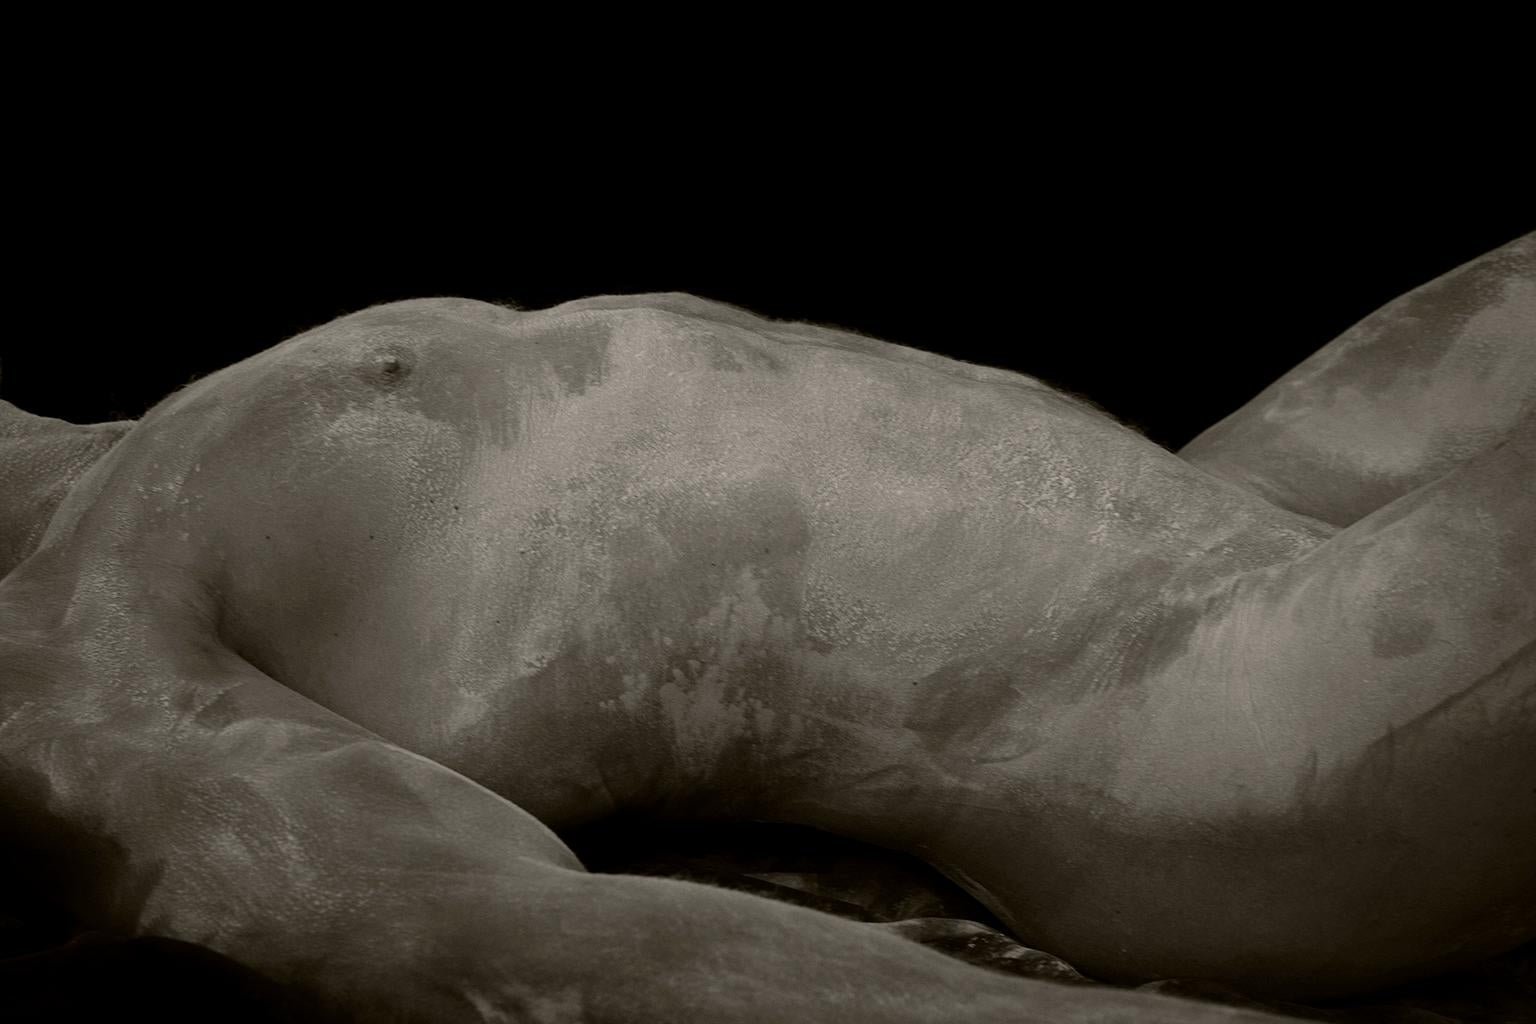 Ricky Cohete Nude Photograph - Sculpture of Cornelio, 4. Male Nude. Black and White Limited Edition Photograph